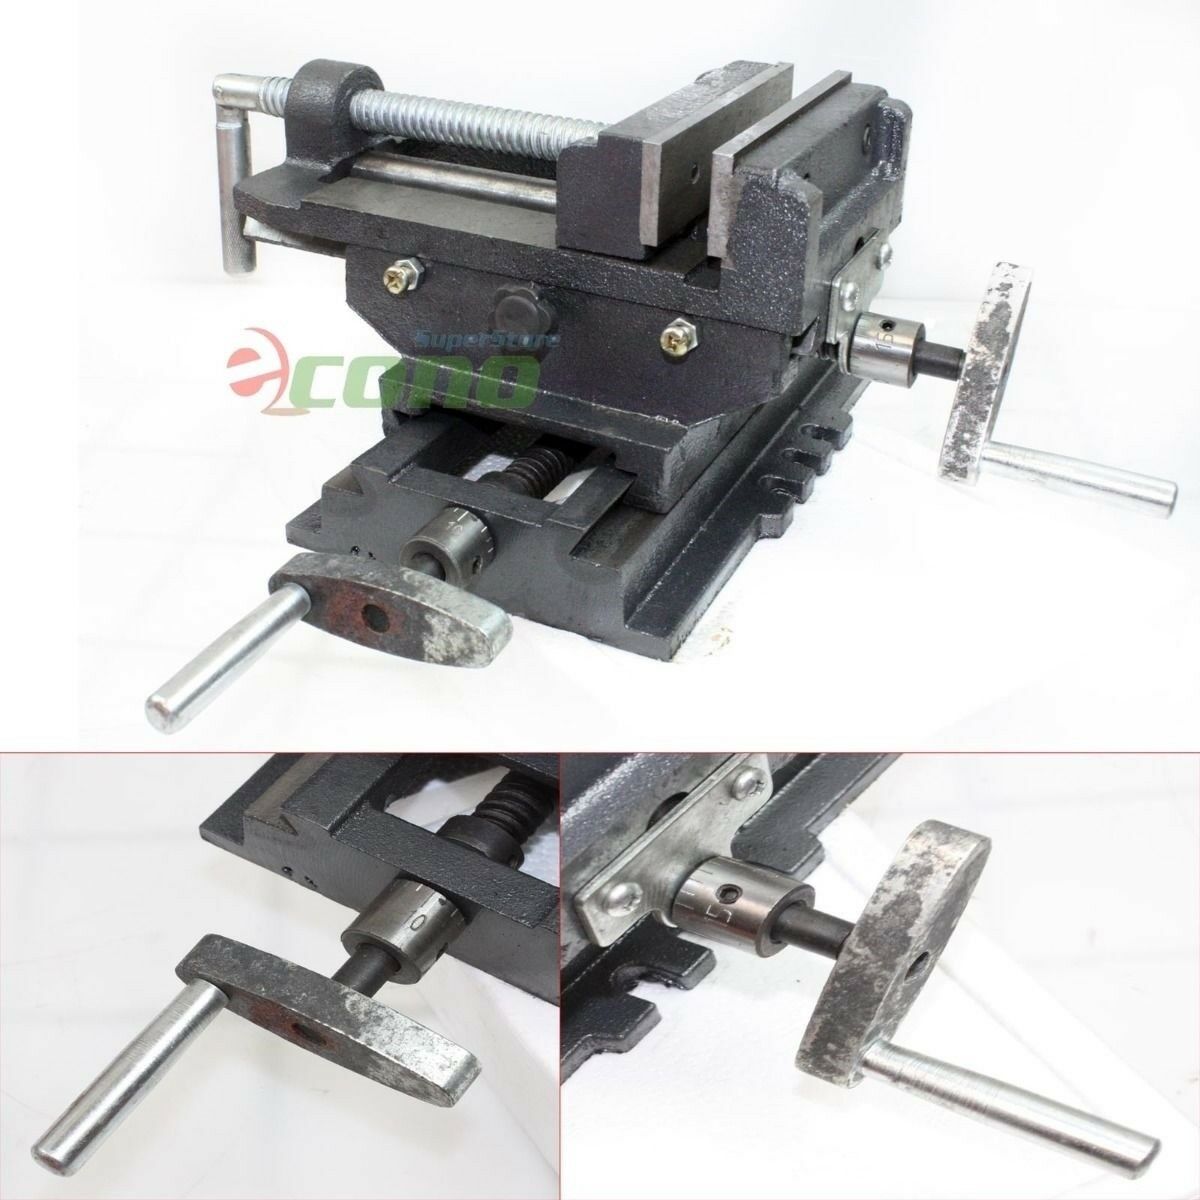 Compound Drill Vice Slide Metal Milling 2 Way X-Y Clamp Machine-83526 6" 150mm 